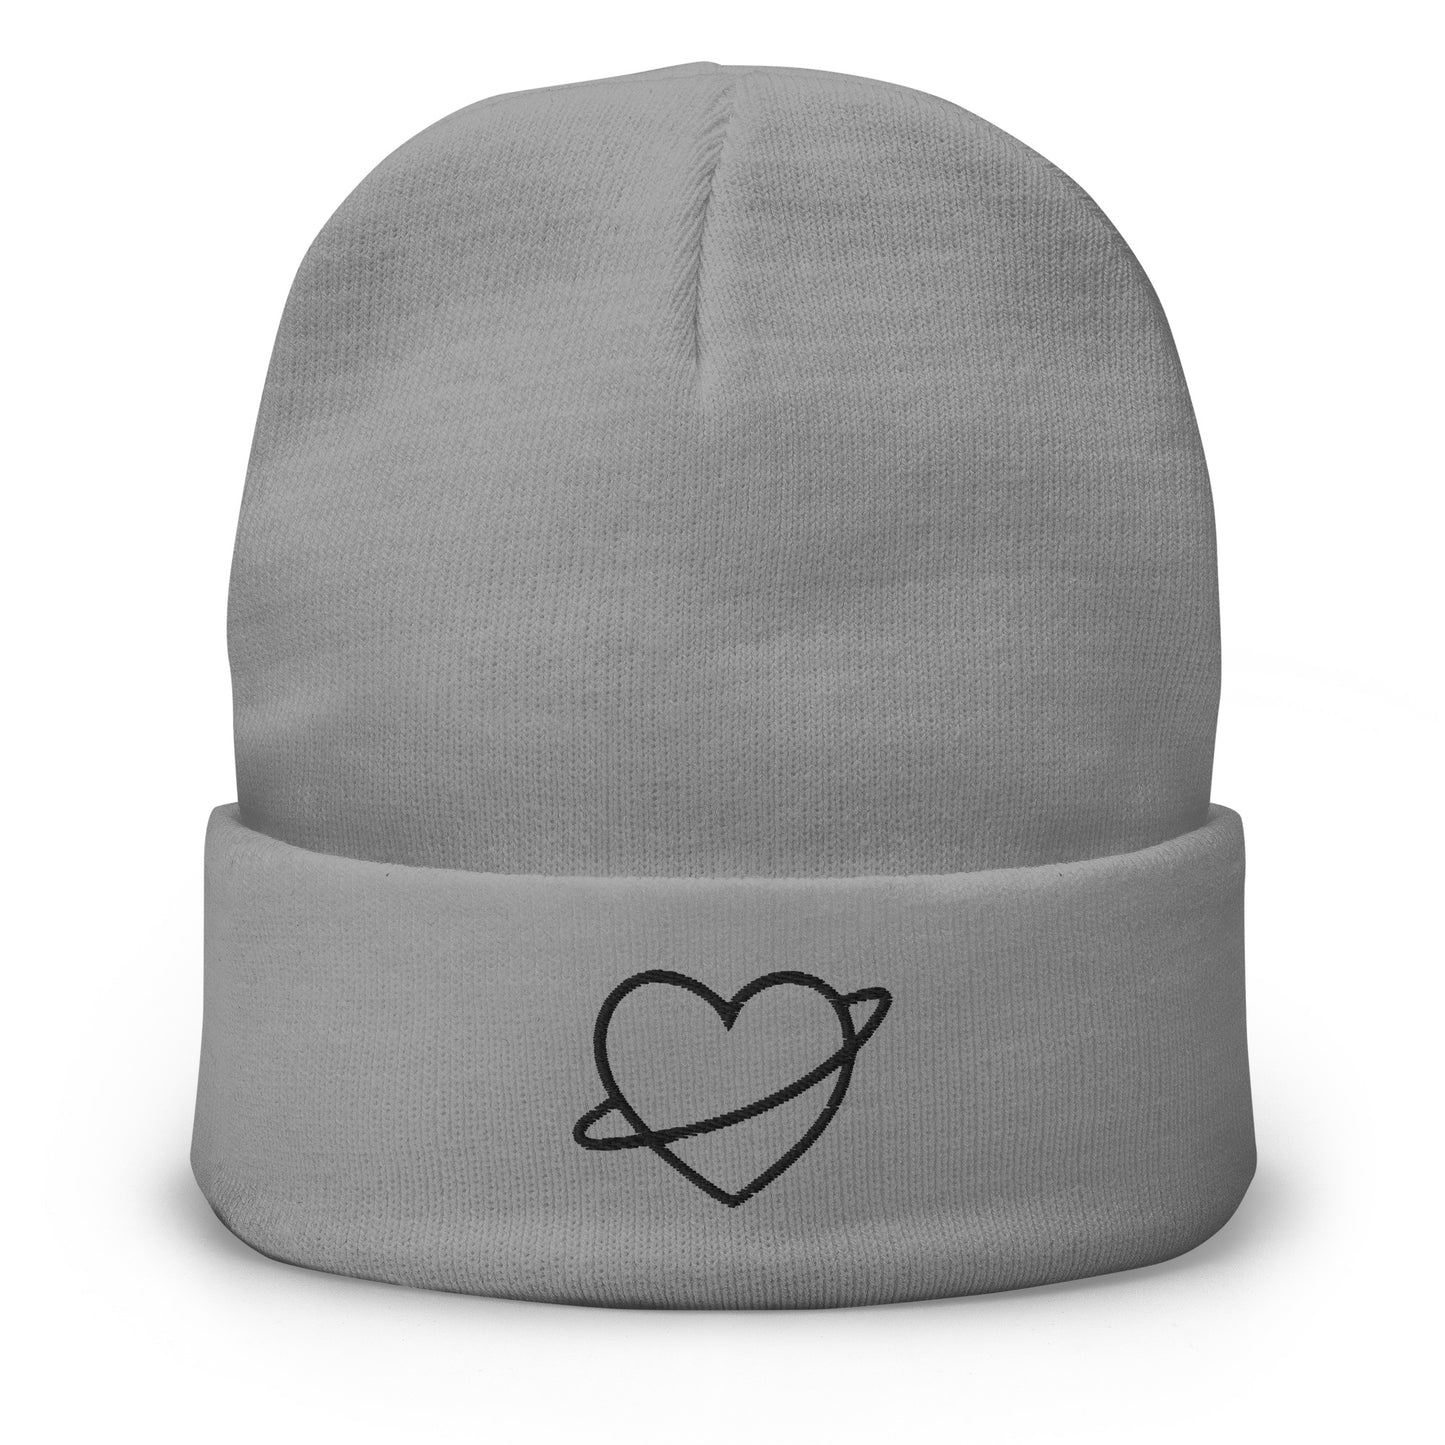 Embroidered hat with heart